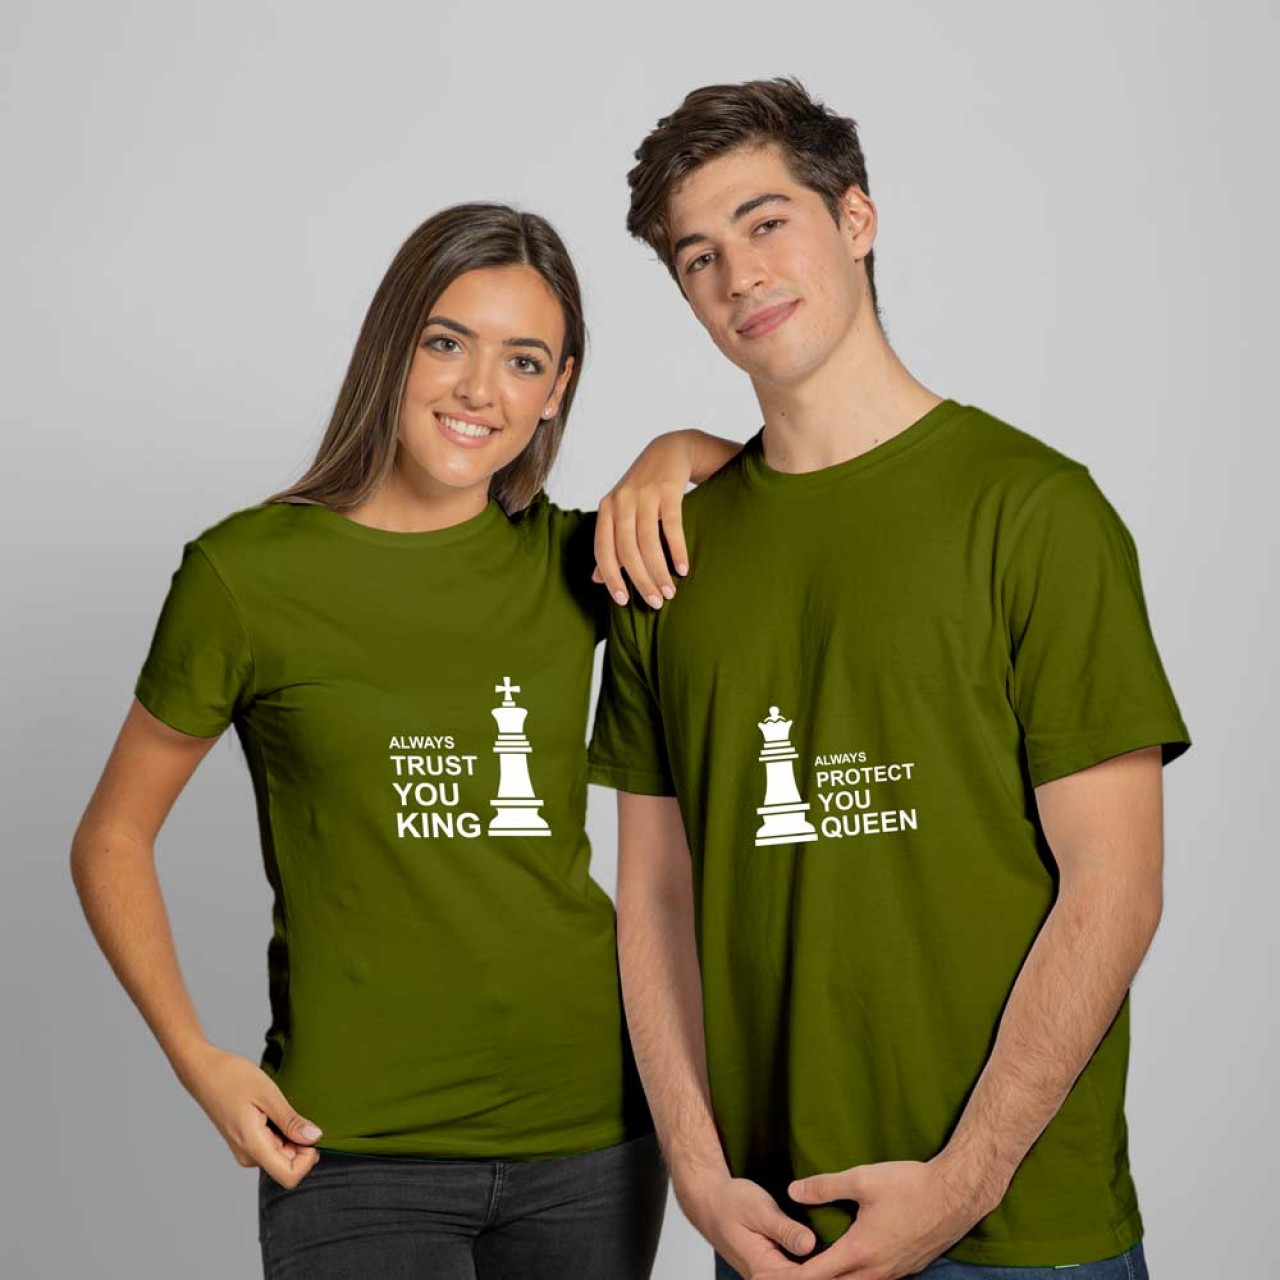 Always Trust & Protect King Queen Cotton T-Shirts For Couples